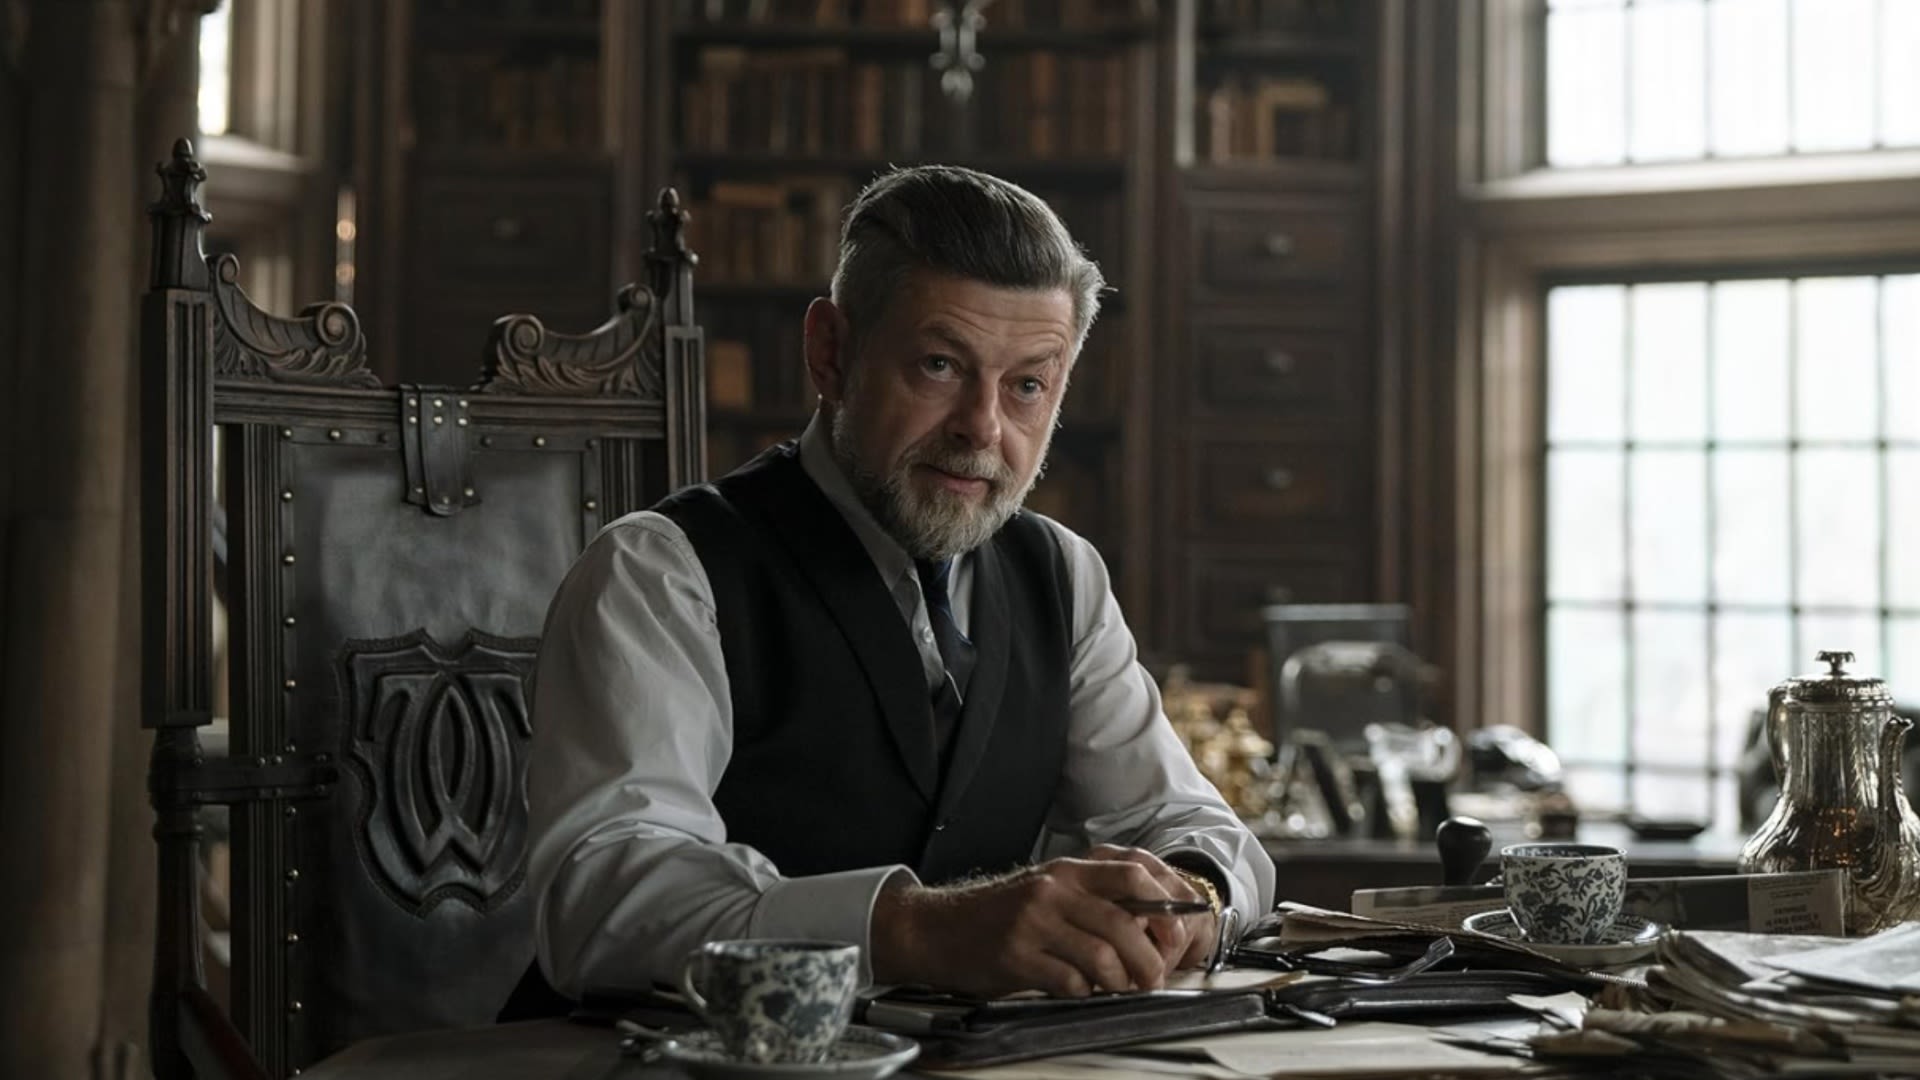 The Batman 2 starts filming early next year, according to Andy Serkis